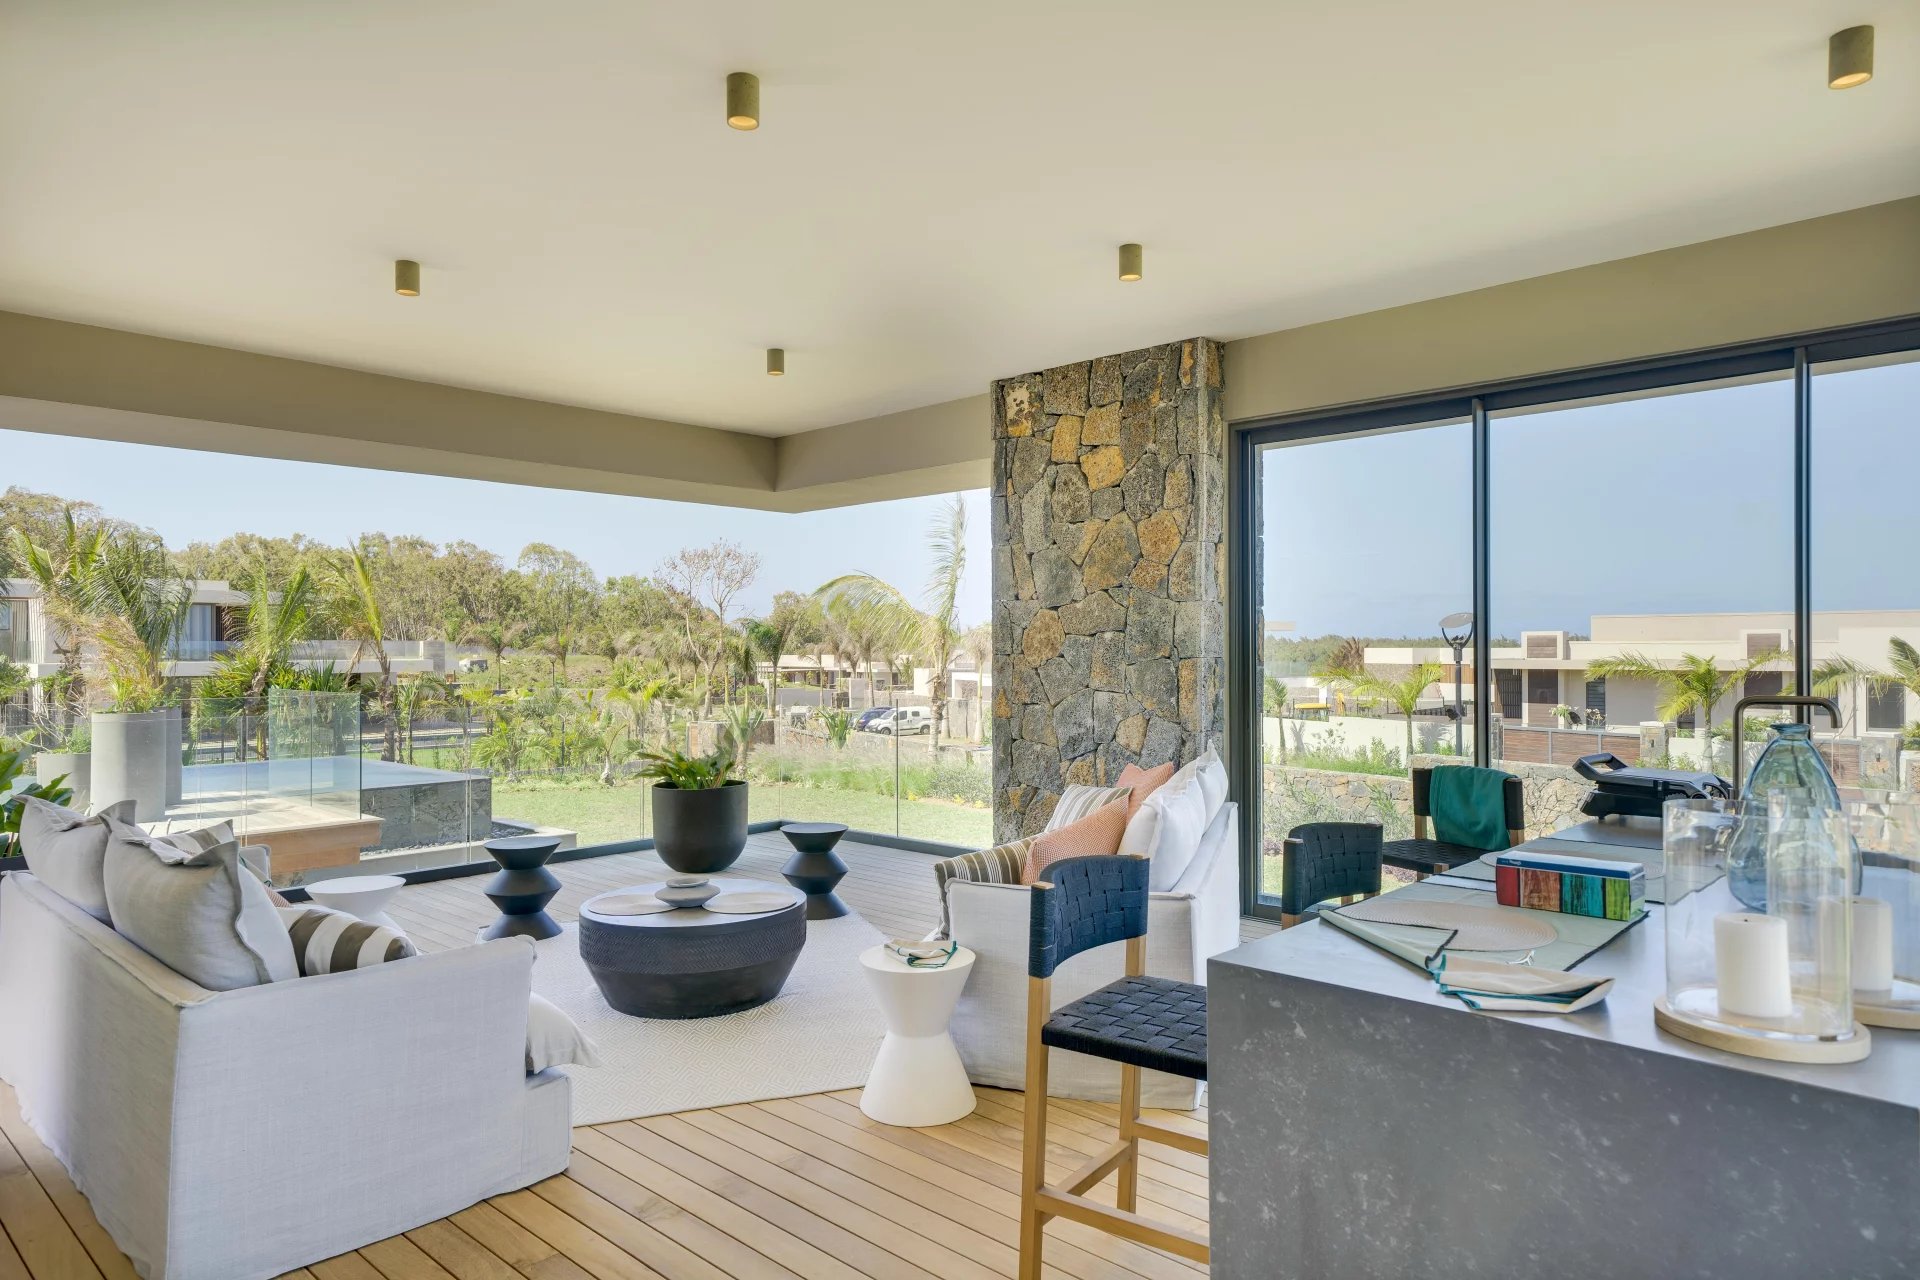 BEAU CHAMP - New villa on a golf course with partial sea view - 4 bedrooms